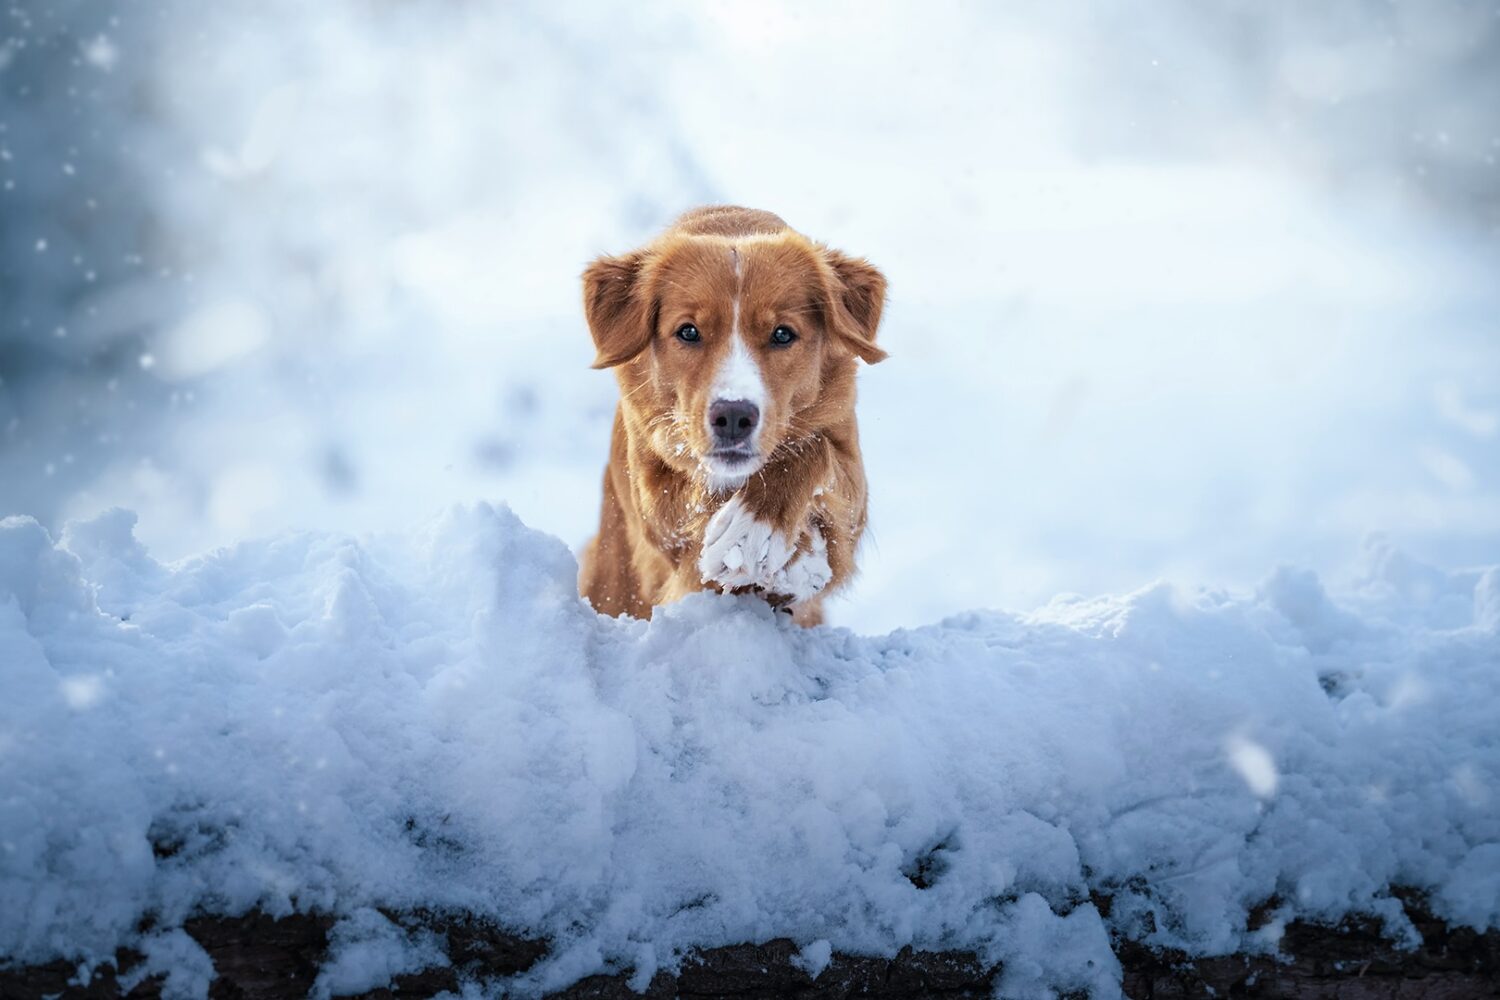 10 chilly new photos from 500px Licensing Contributors